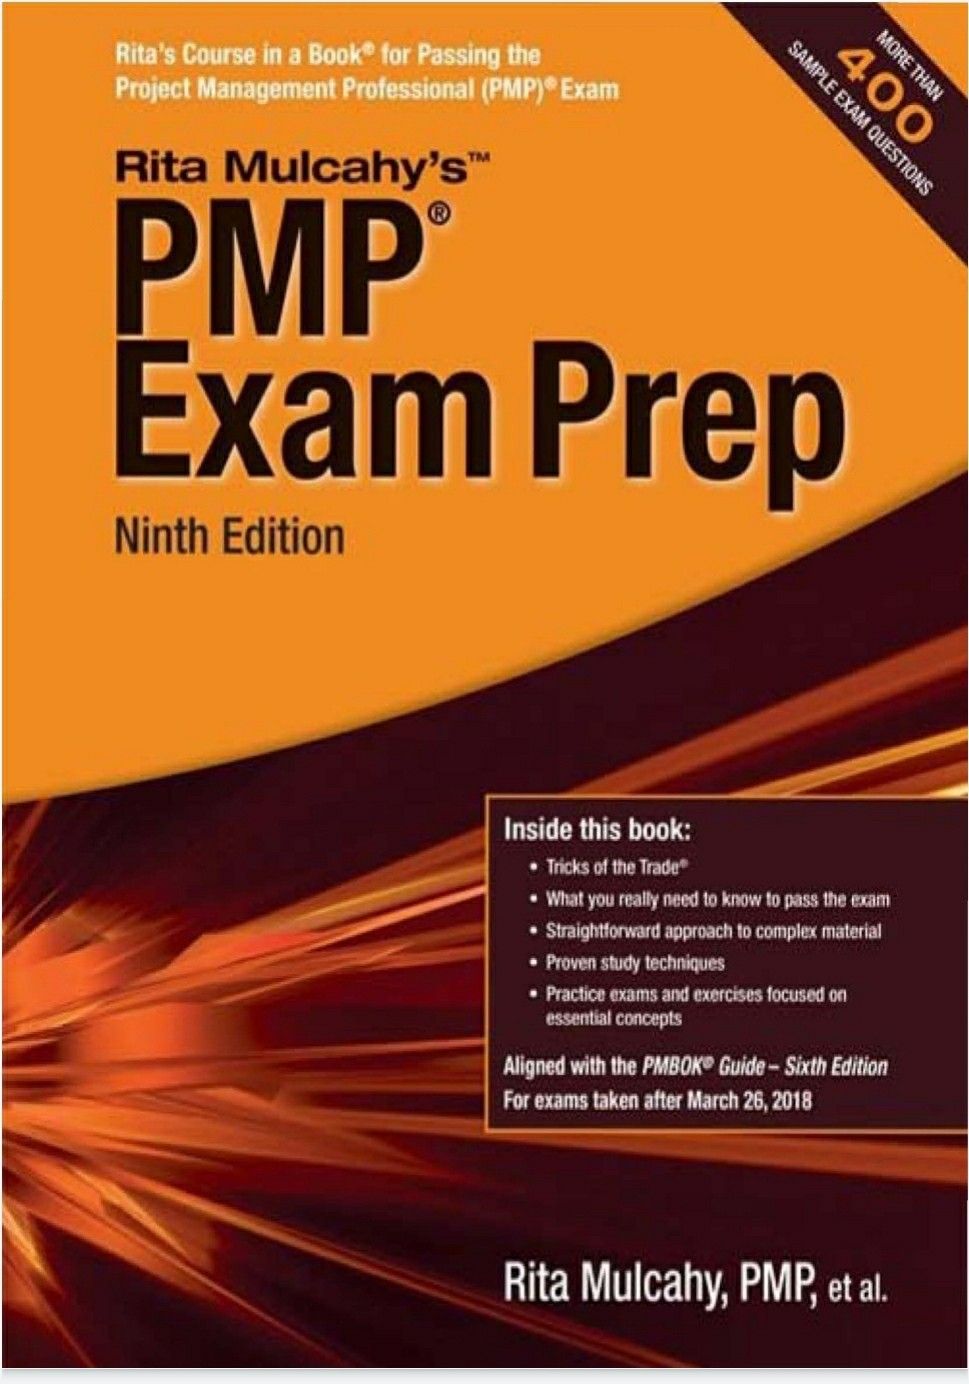 PMP Exam Prep Ninth Edition by Rita Mulcahy 9781943704040 eBook PDF free instant delivery